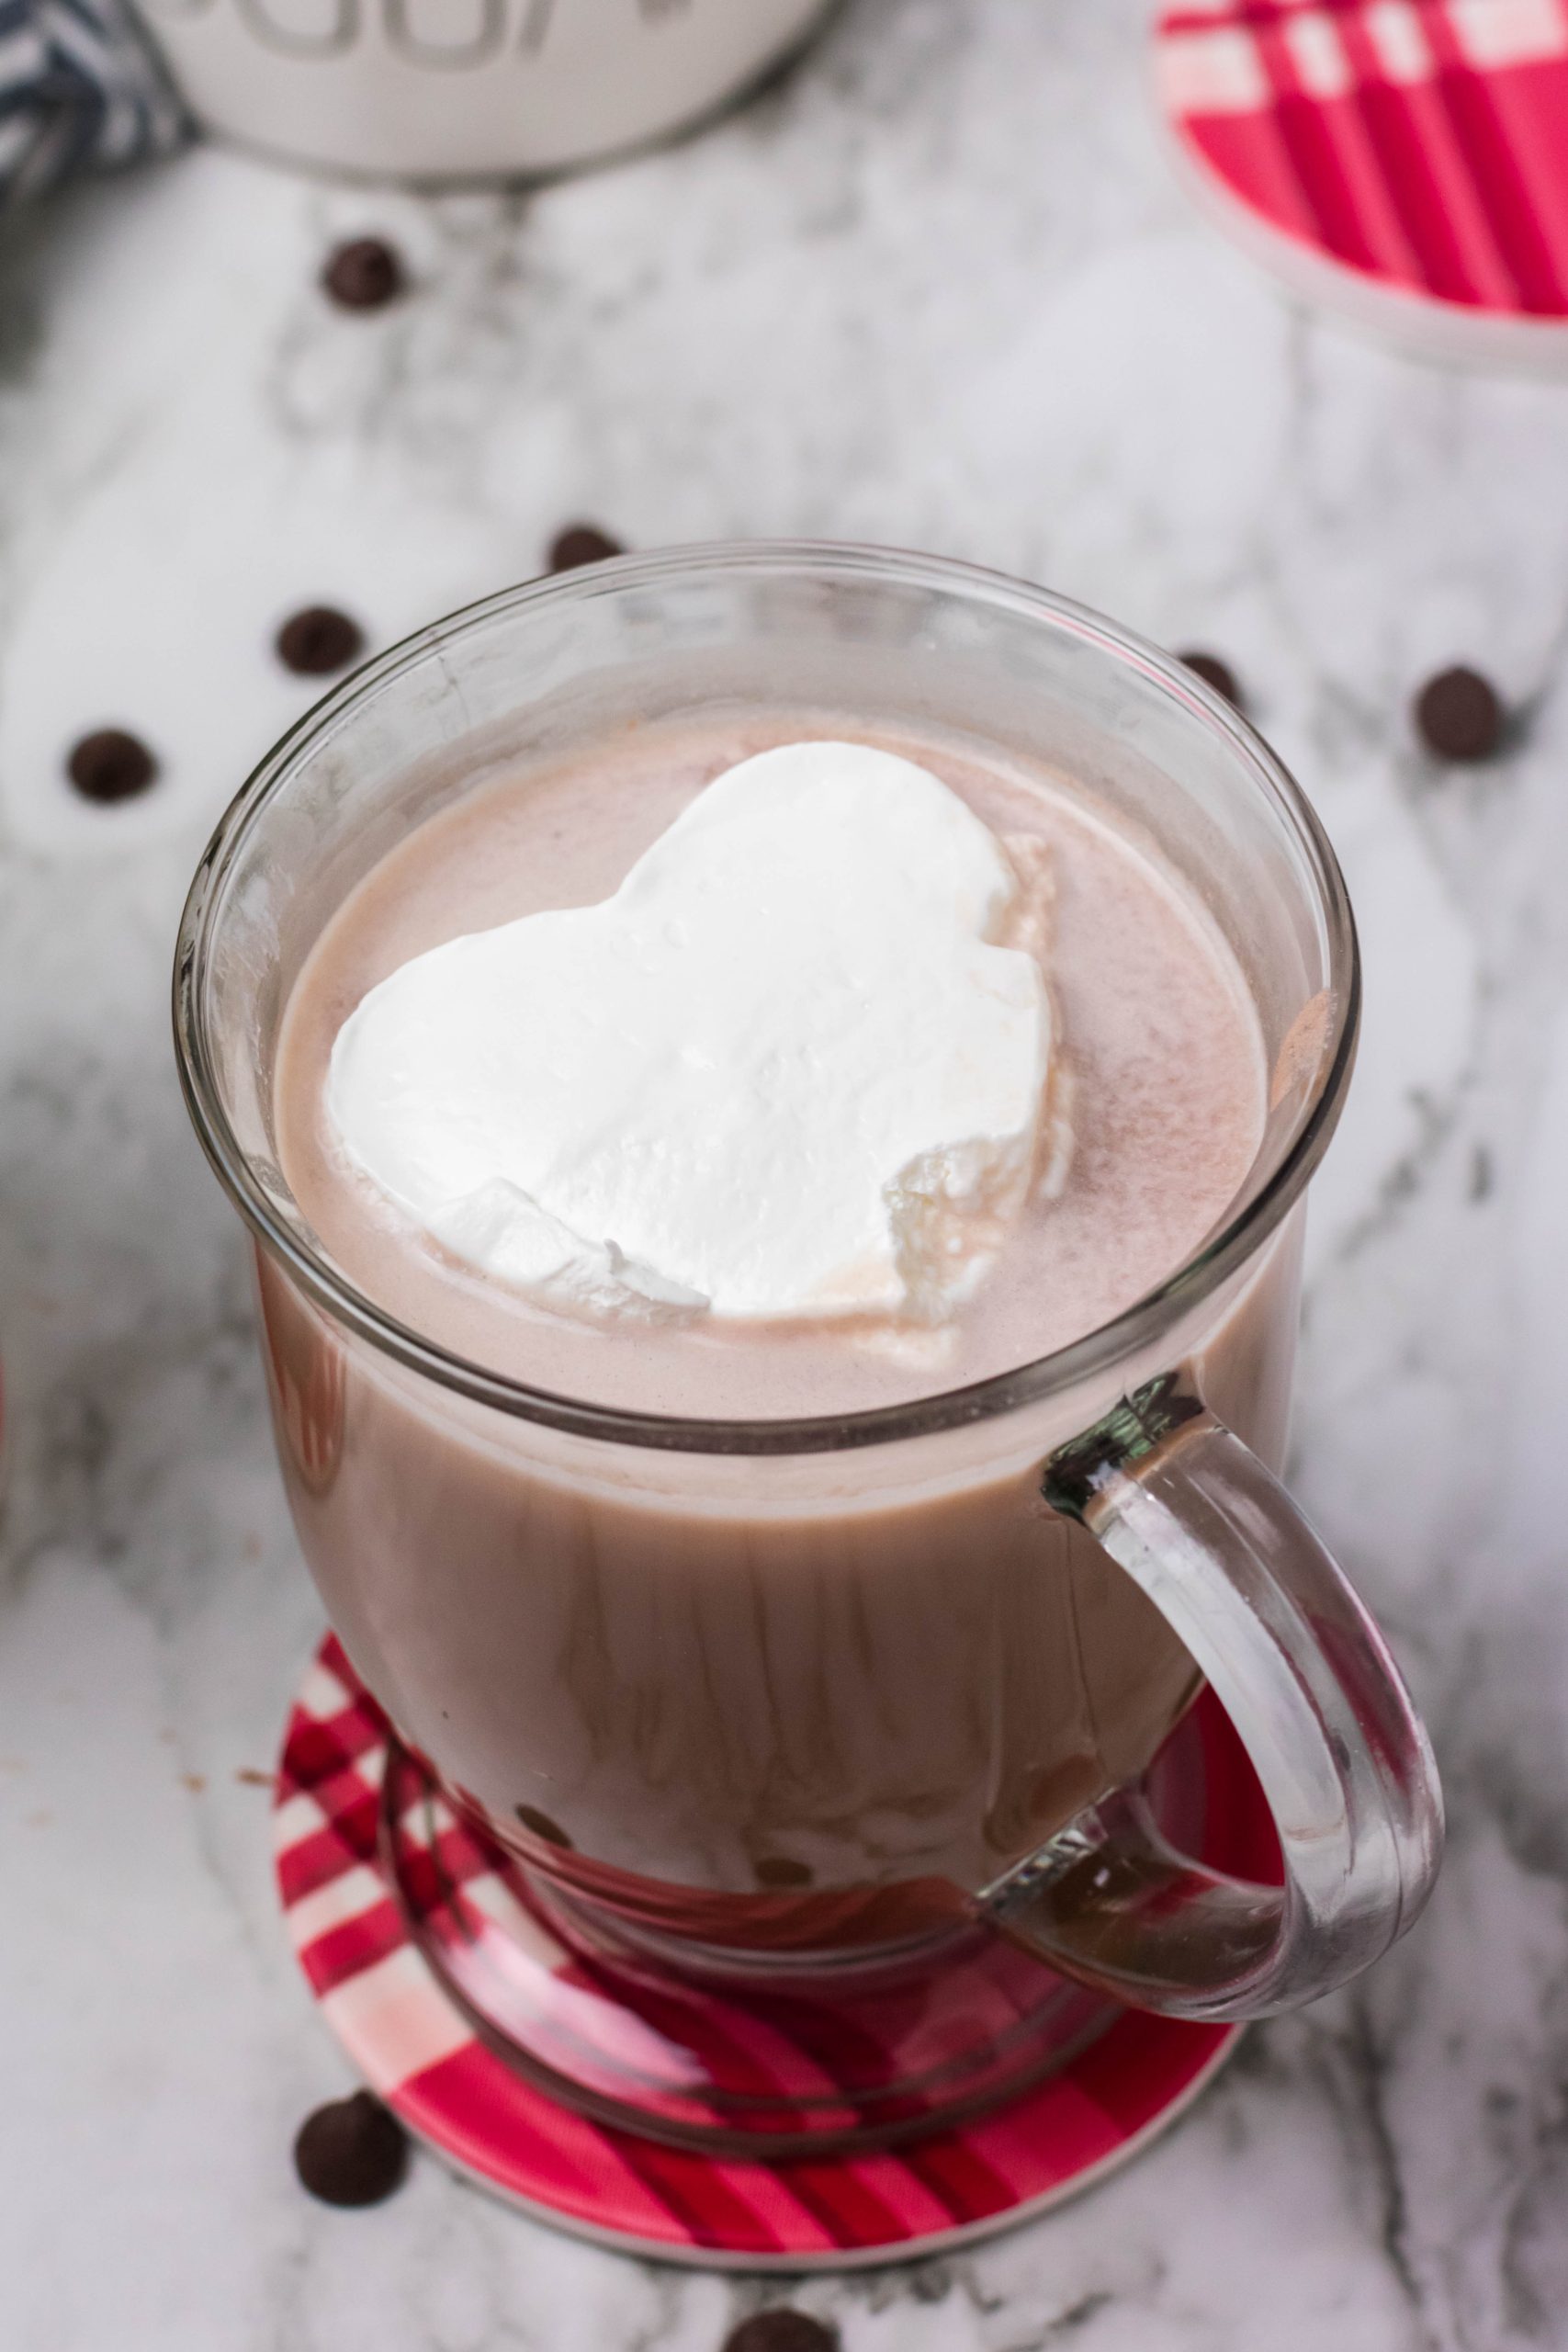 How to Make These Family-Friendly Frozen Whipped Cream Hot Chocolate Toppers